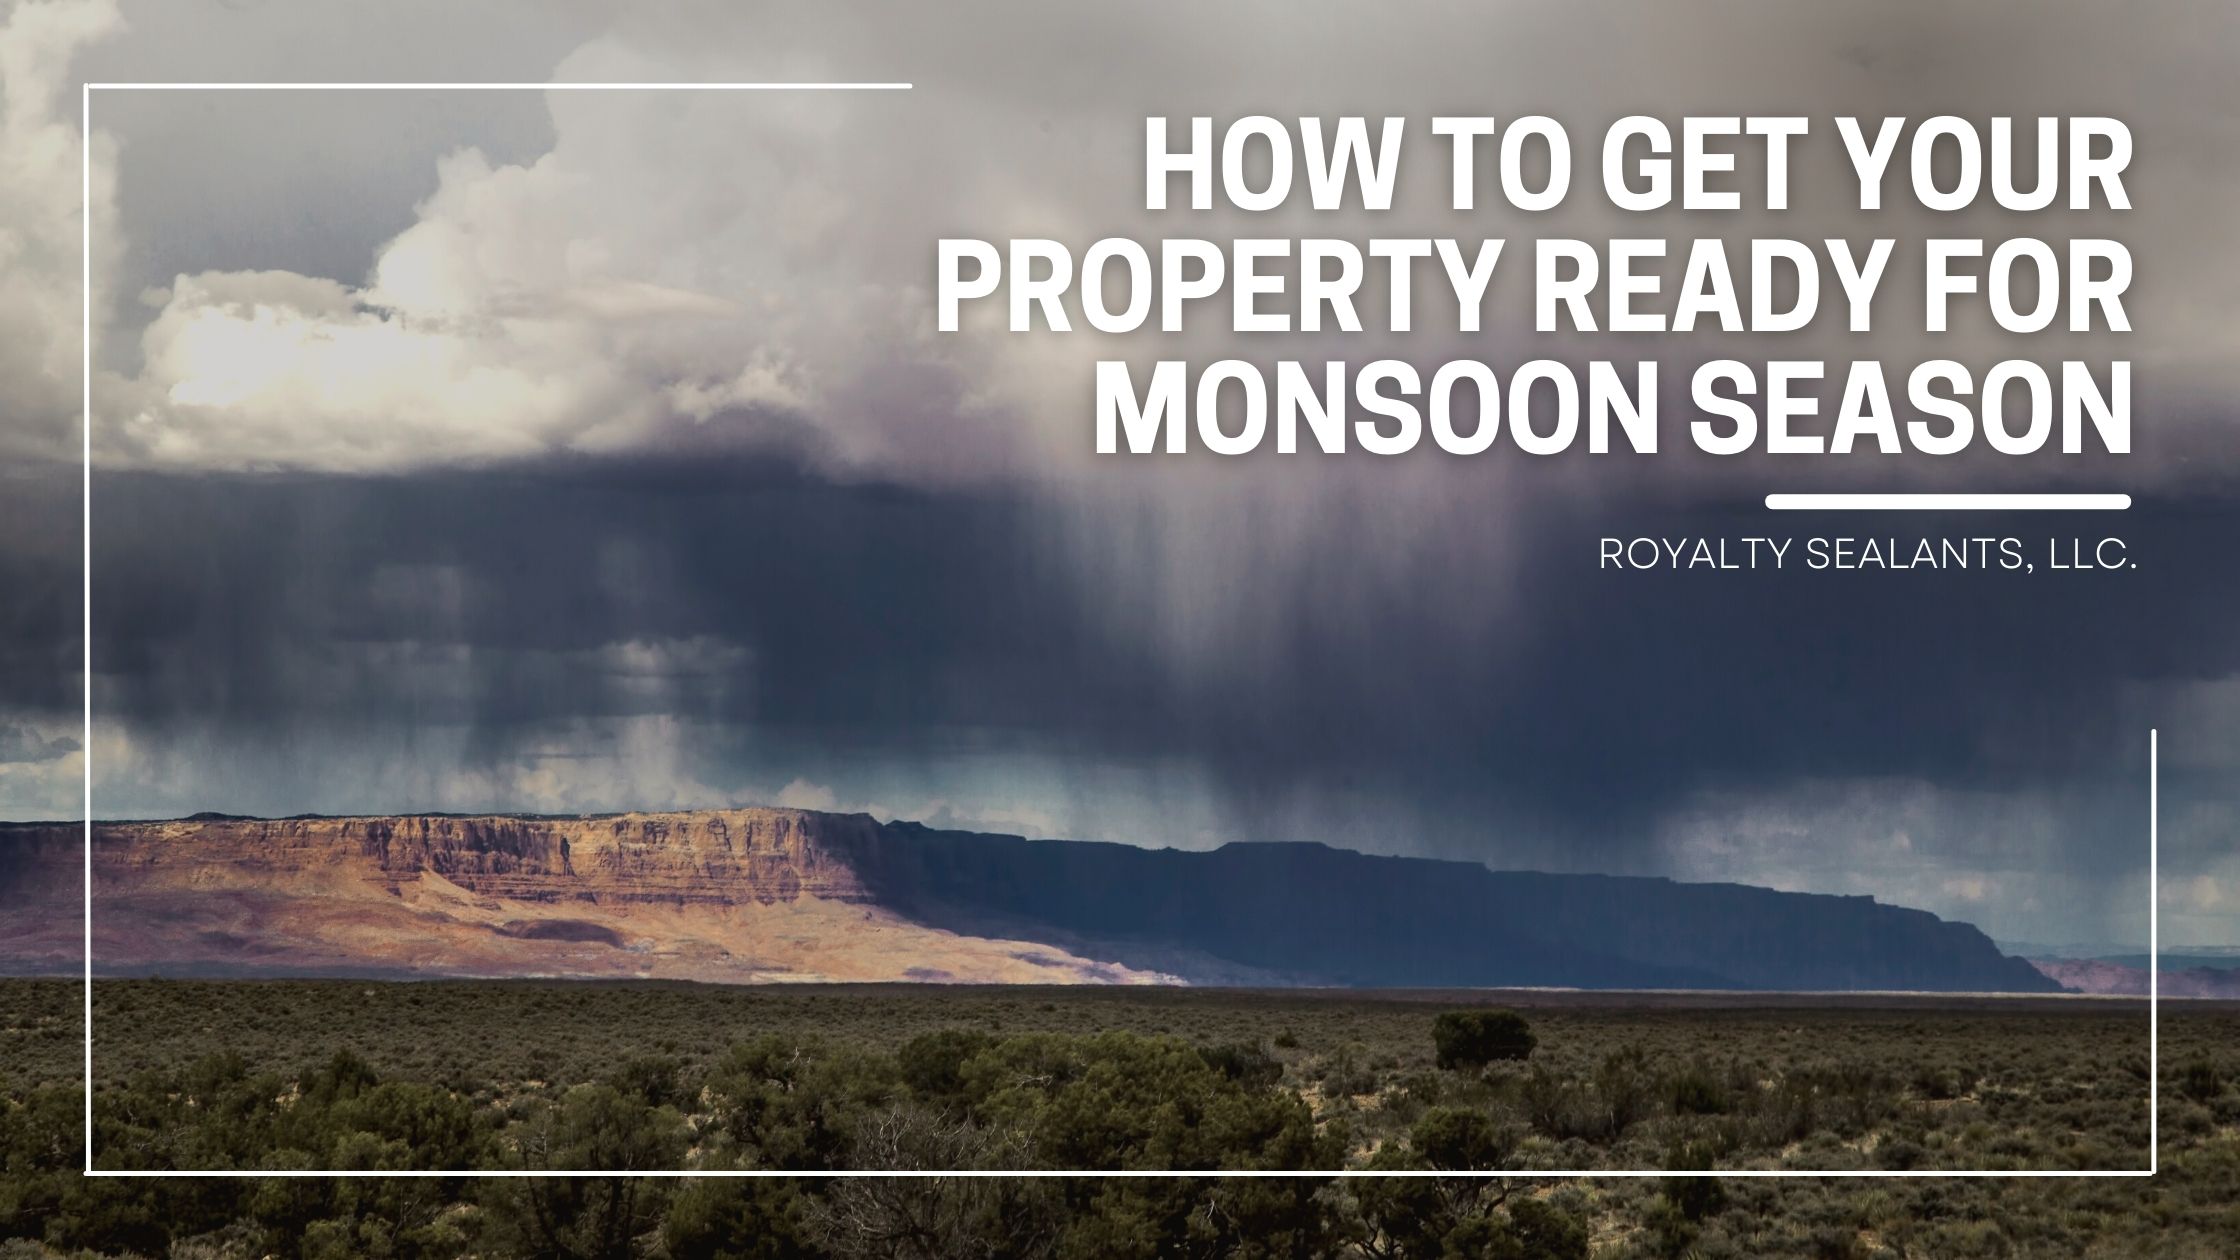 How To Get Your Property Ready For Monsoon Season